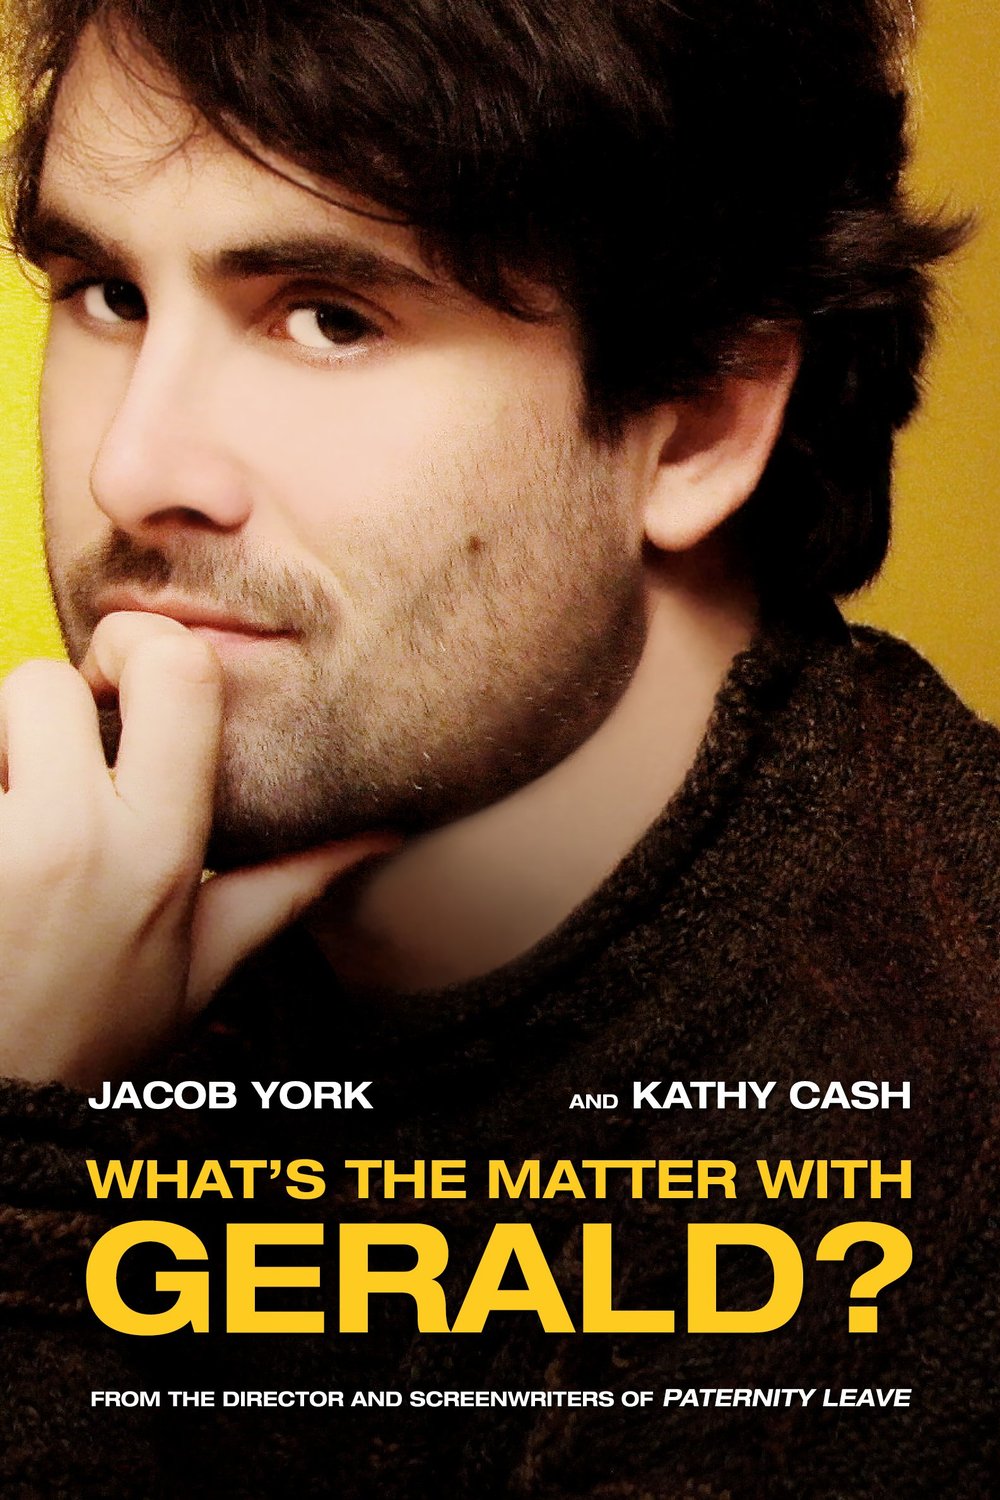 Poster of the movie What's the Matter with Gerald?